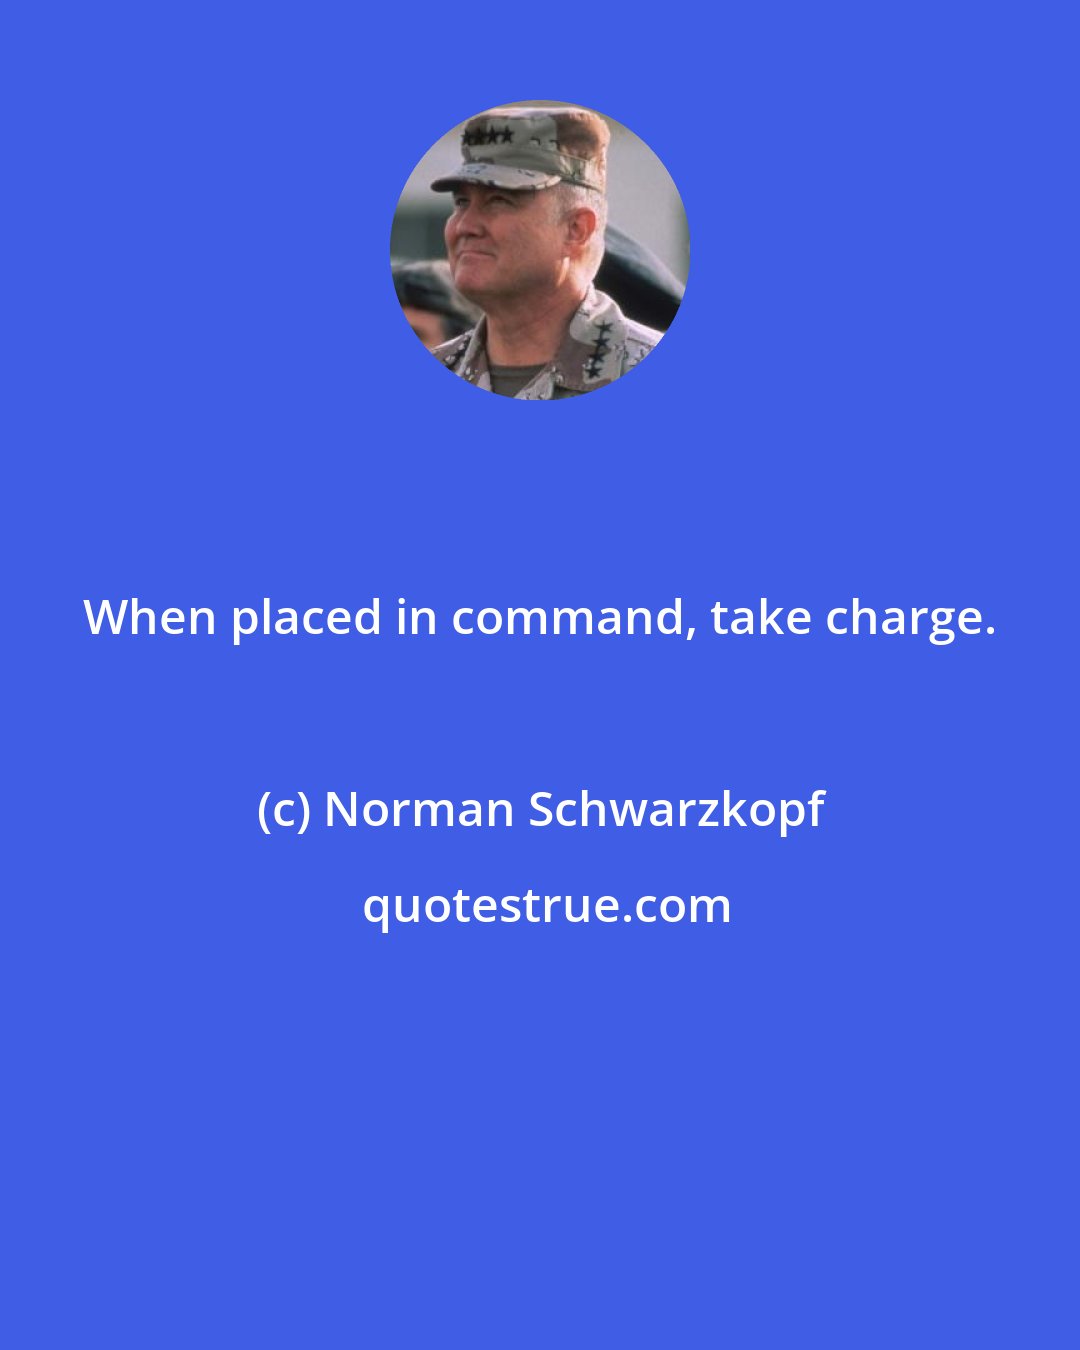 Norman Schwarzkopf: When placed in command, take charge.